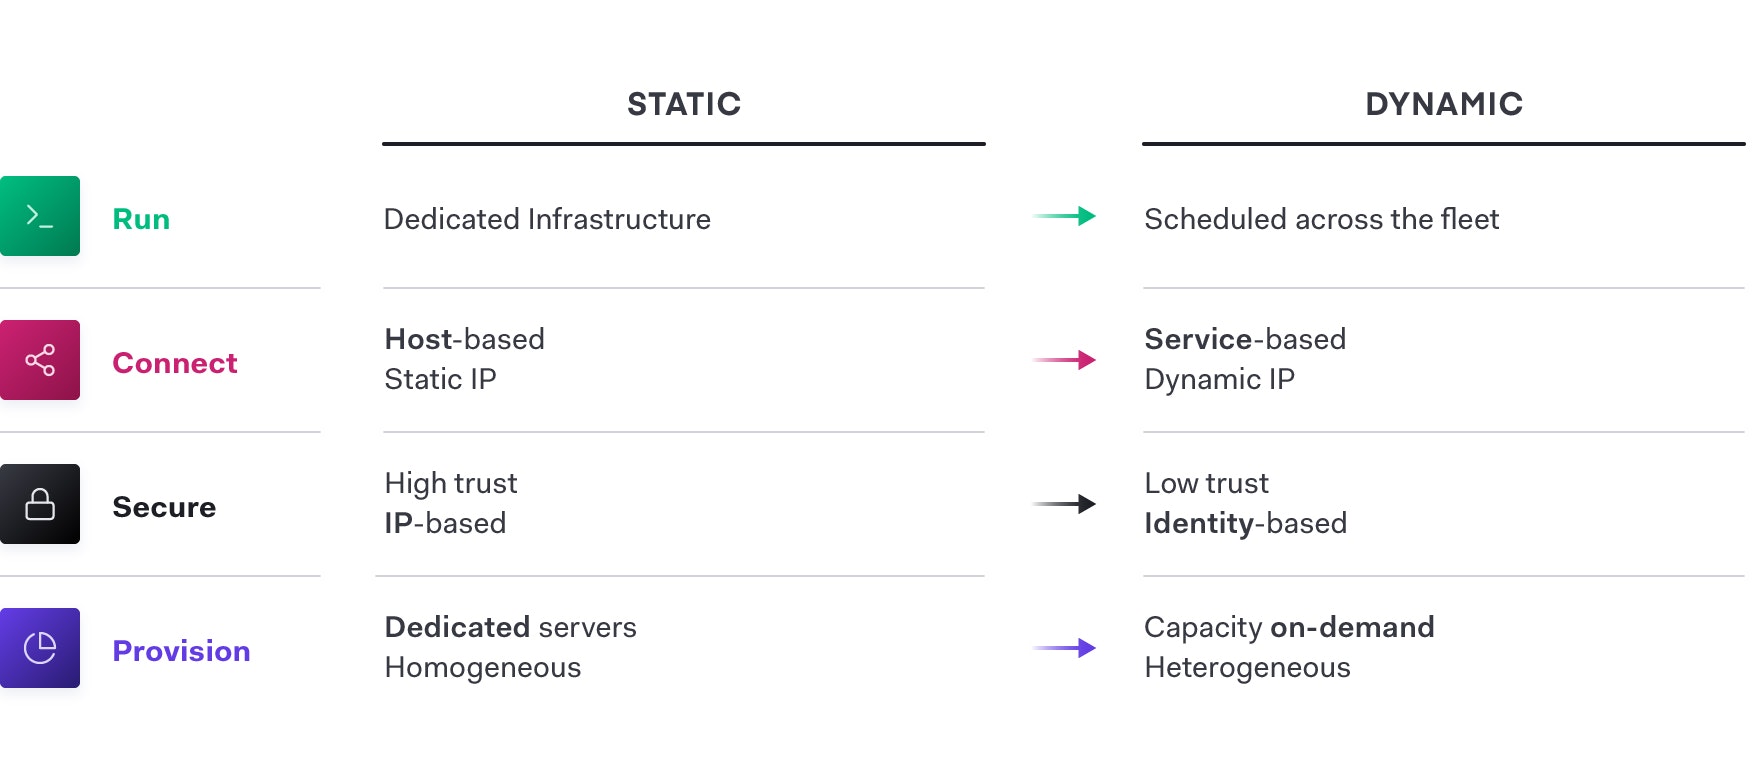 <strong>Provision, Secure, Connect, and Run:</strong>
 The HashiCorp Model for Moving from Static to Dynamic Infrastructure